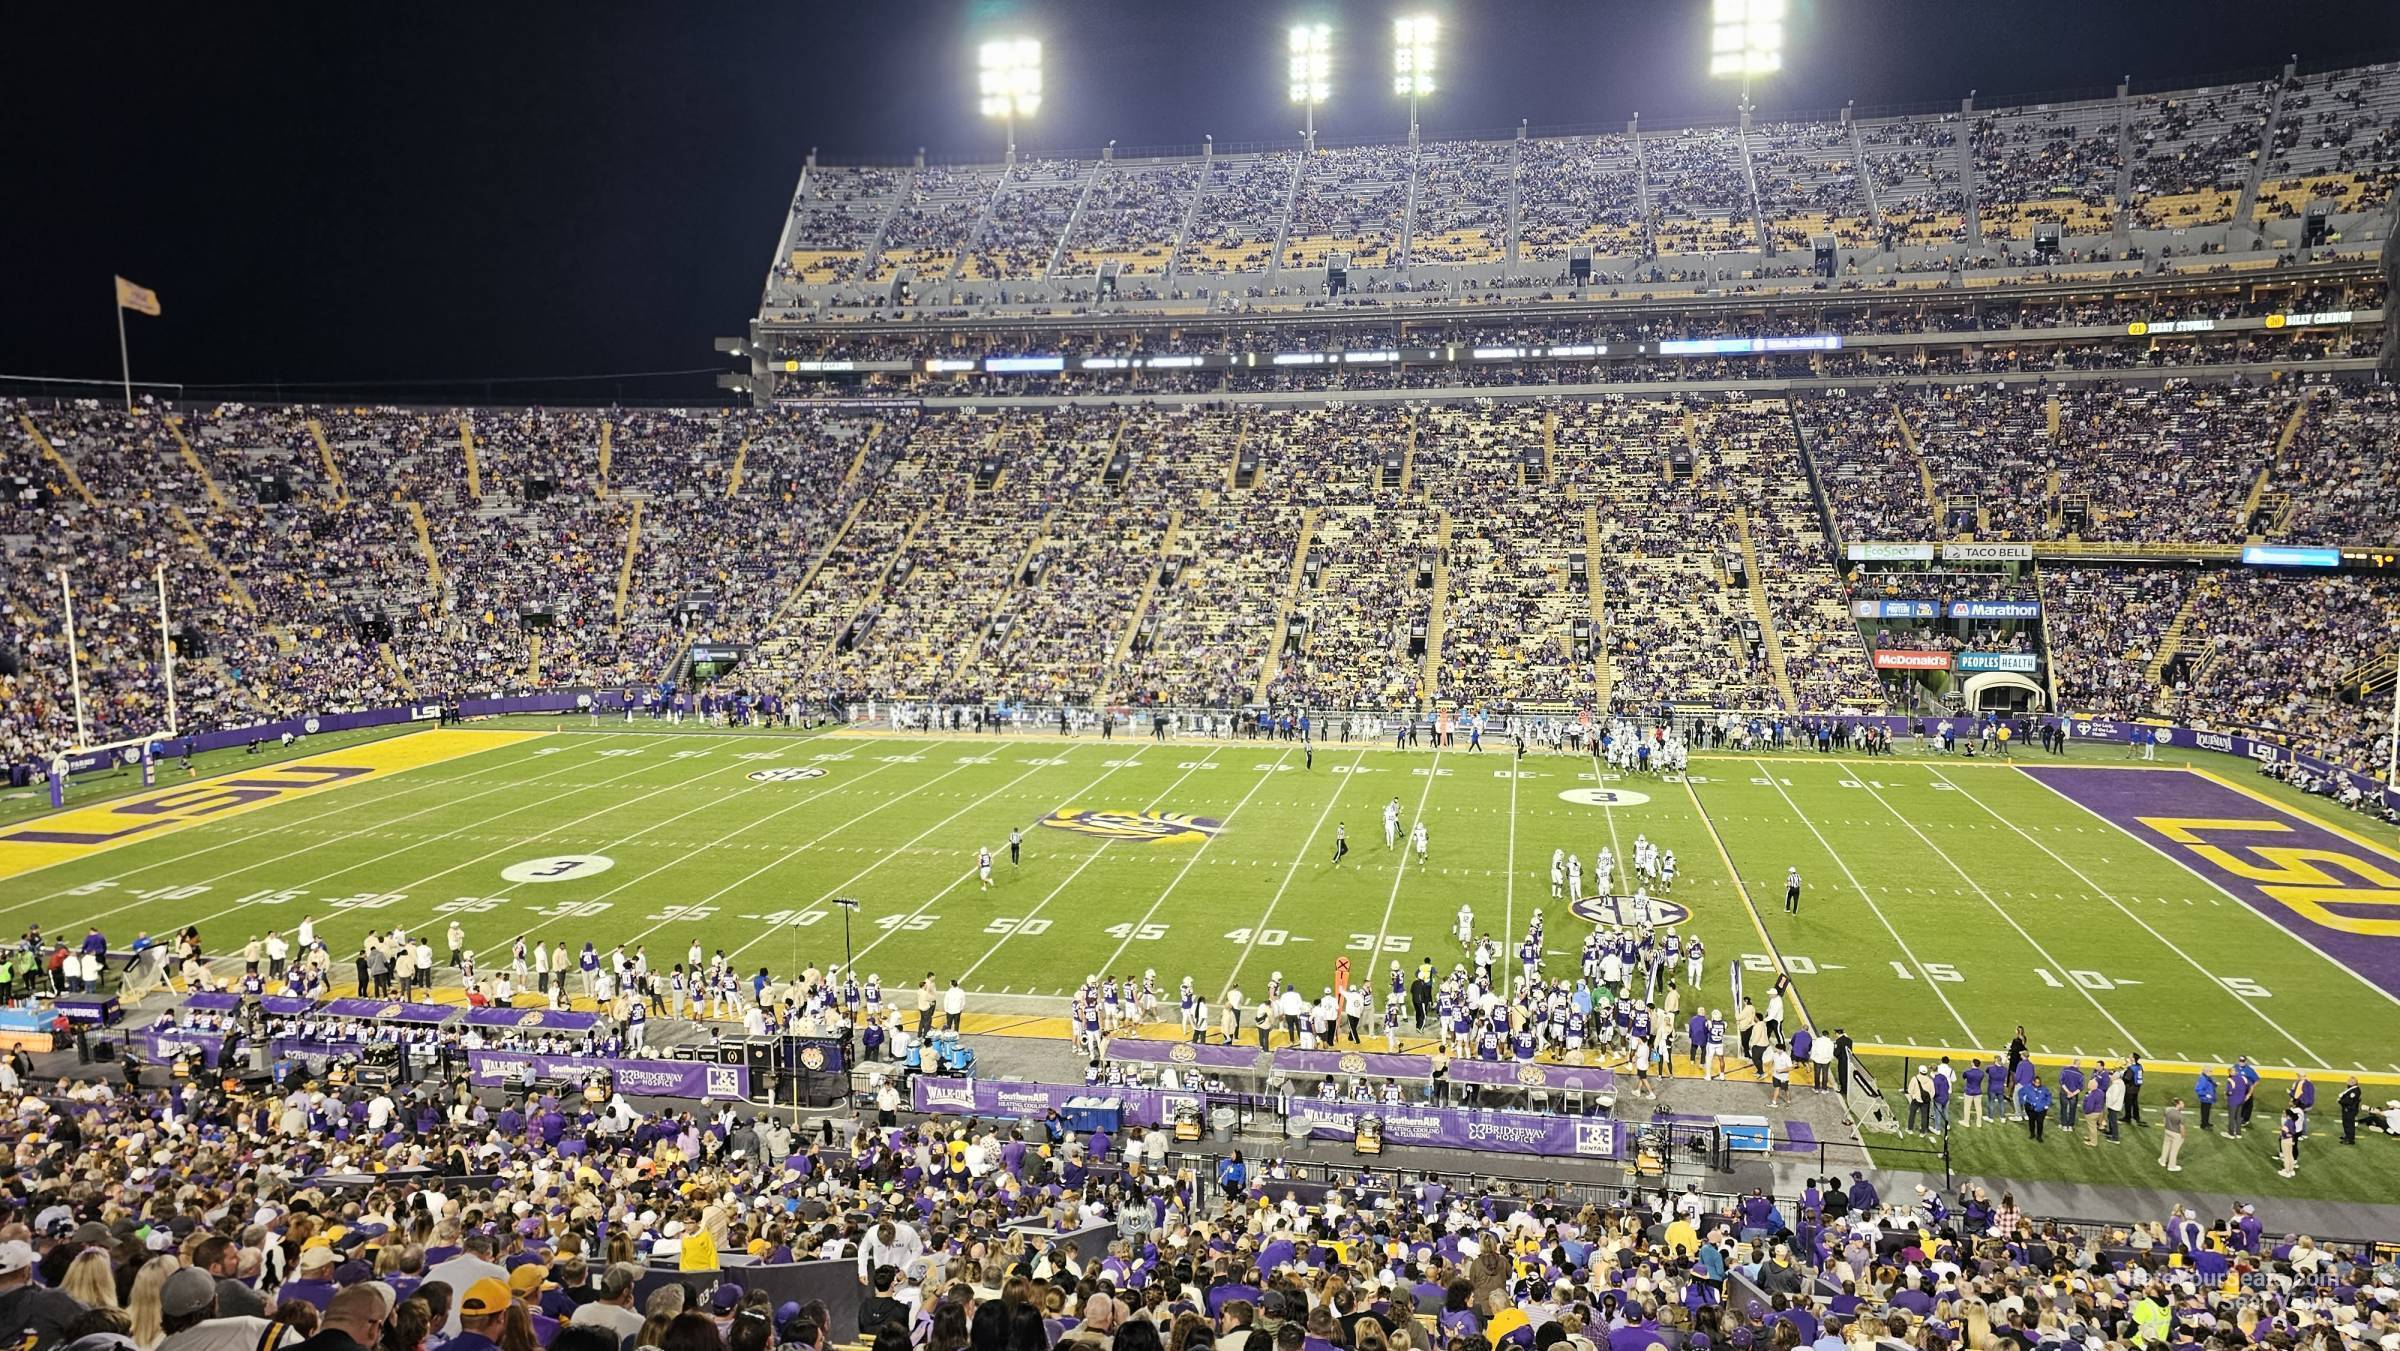 section 102, row 48 seat view  - tiger stadium